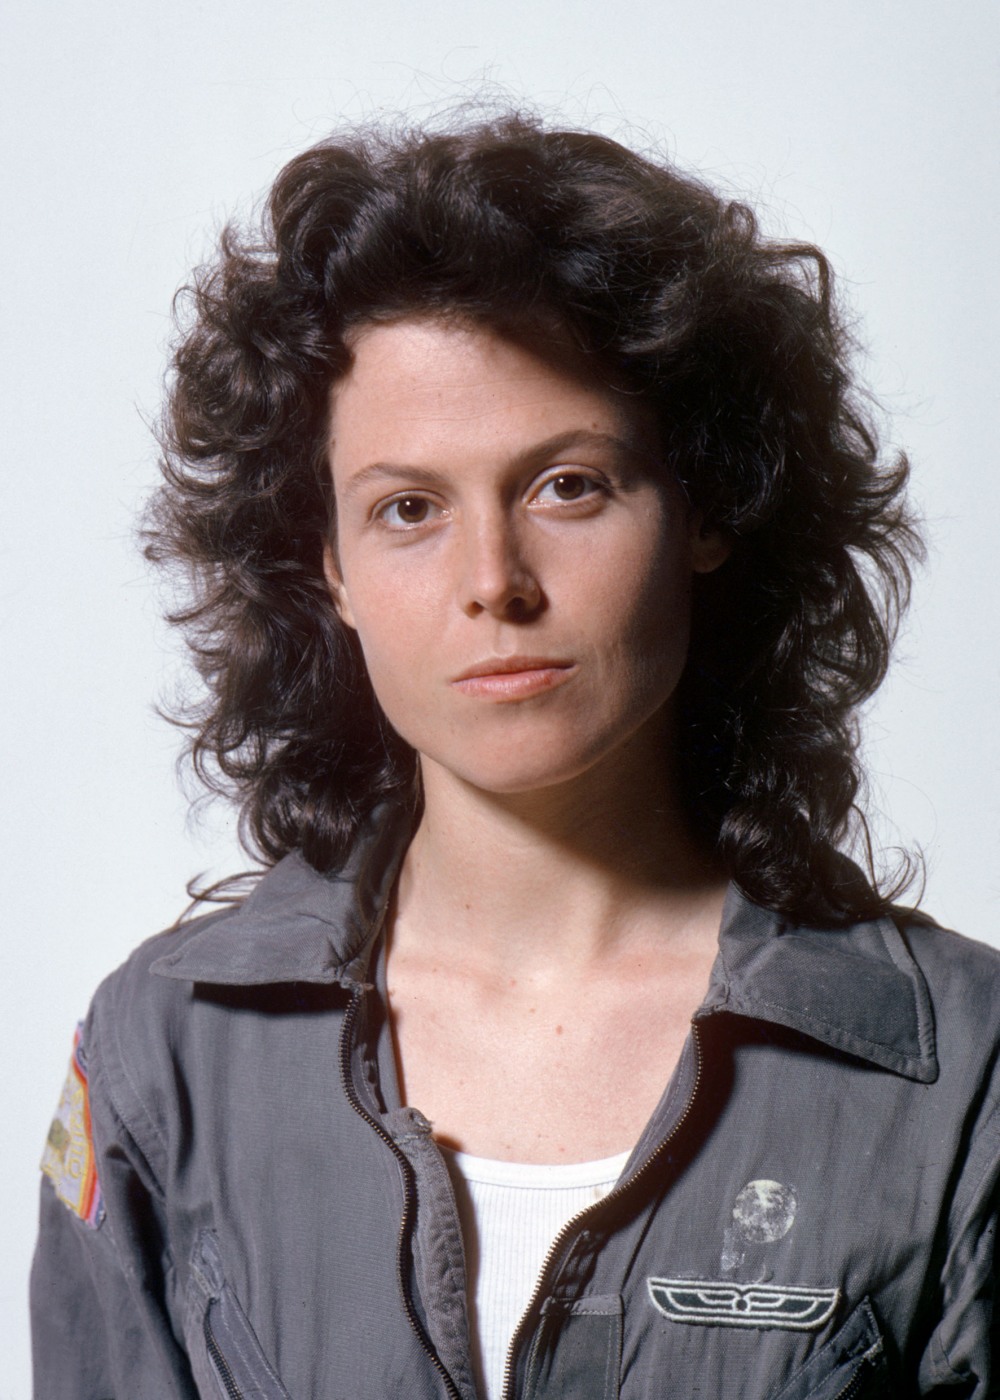 High Quality Sigourney Weaver Wallpaper Full HD Pictures